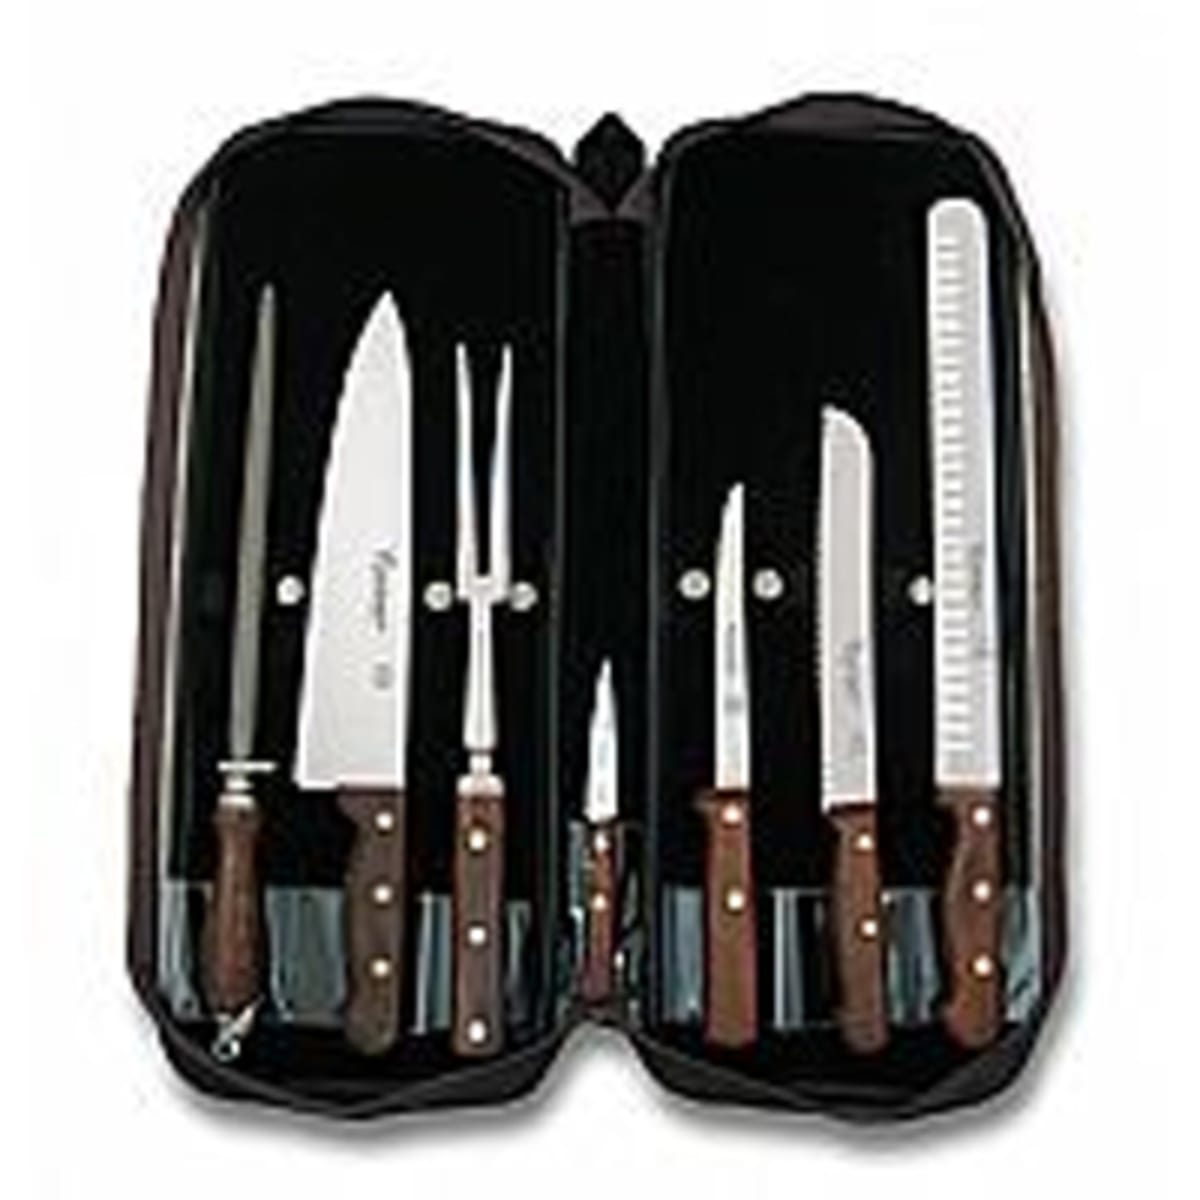 Dexter-Russell V3CP V-LO 3 Piece Cutlery Set – THE FIRST